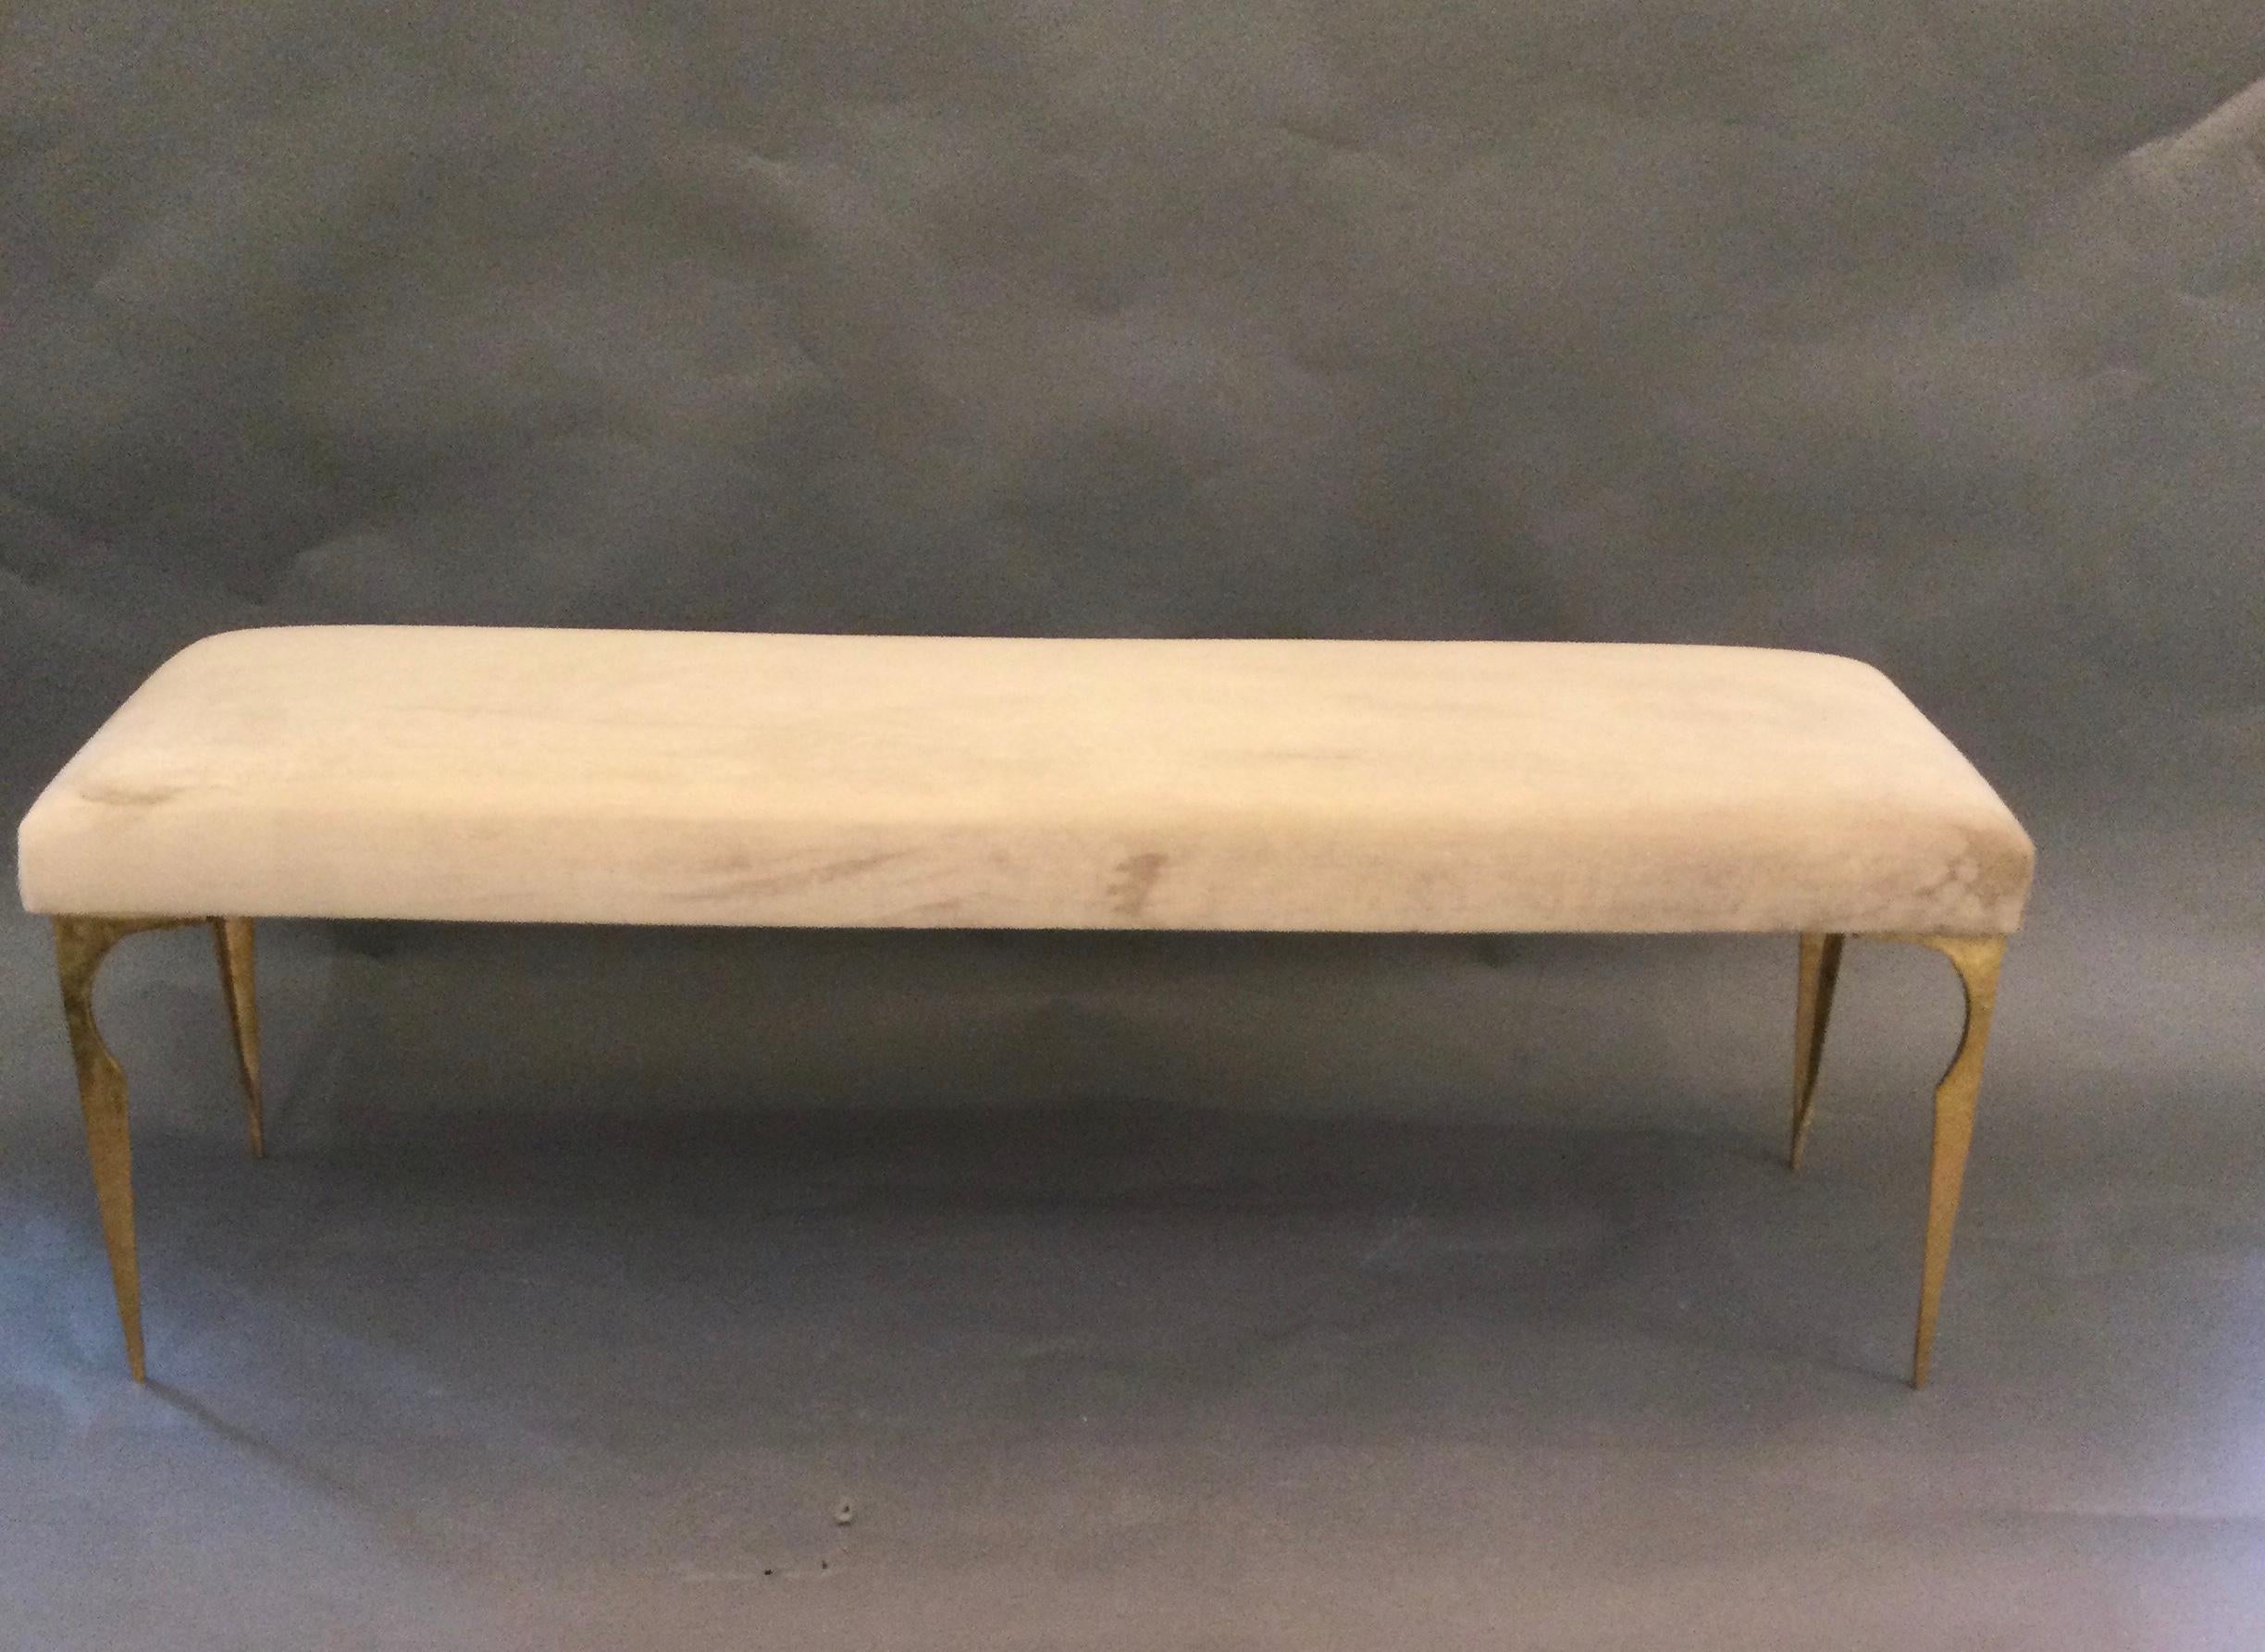 Late 20th Century French Upholstered Bench on Bronze Legs Style of Maria Pergay, 1970